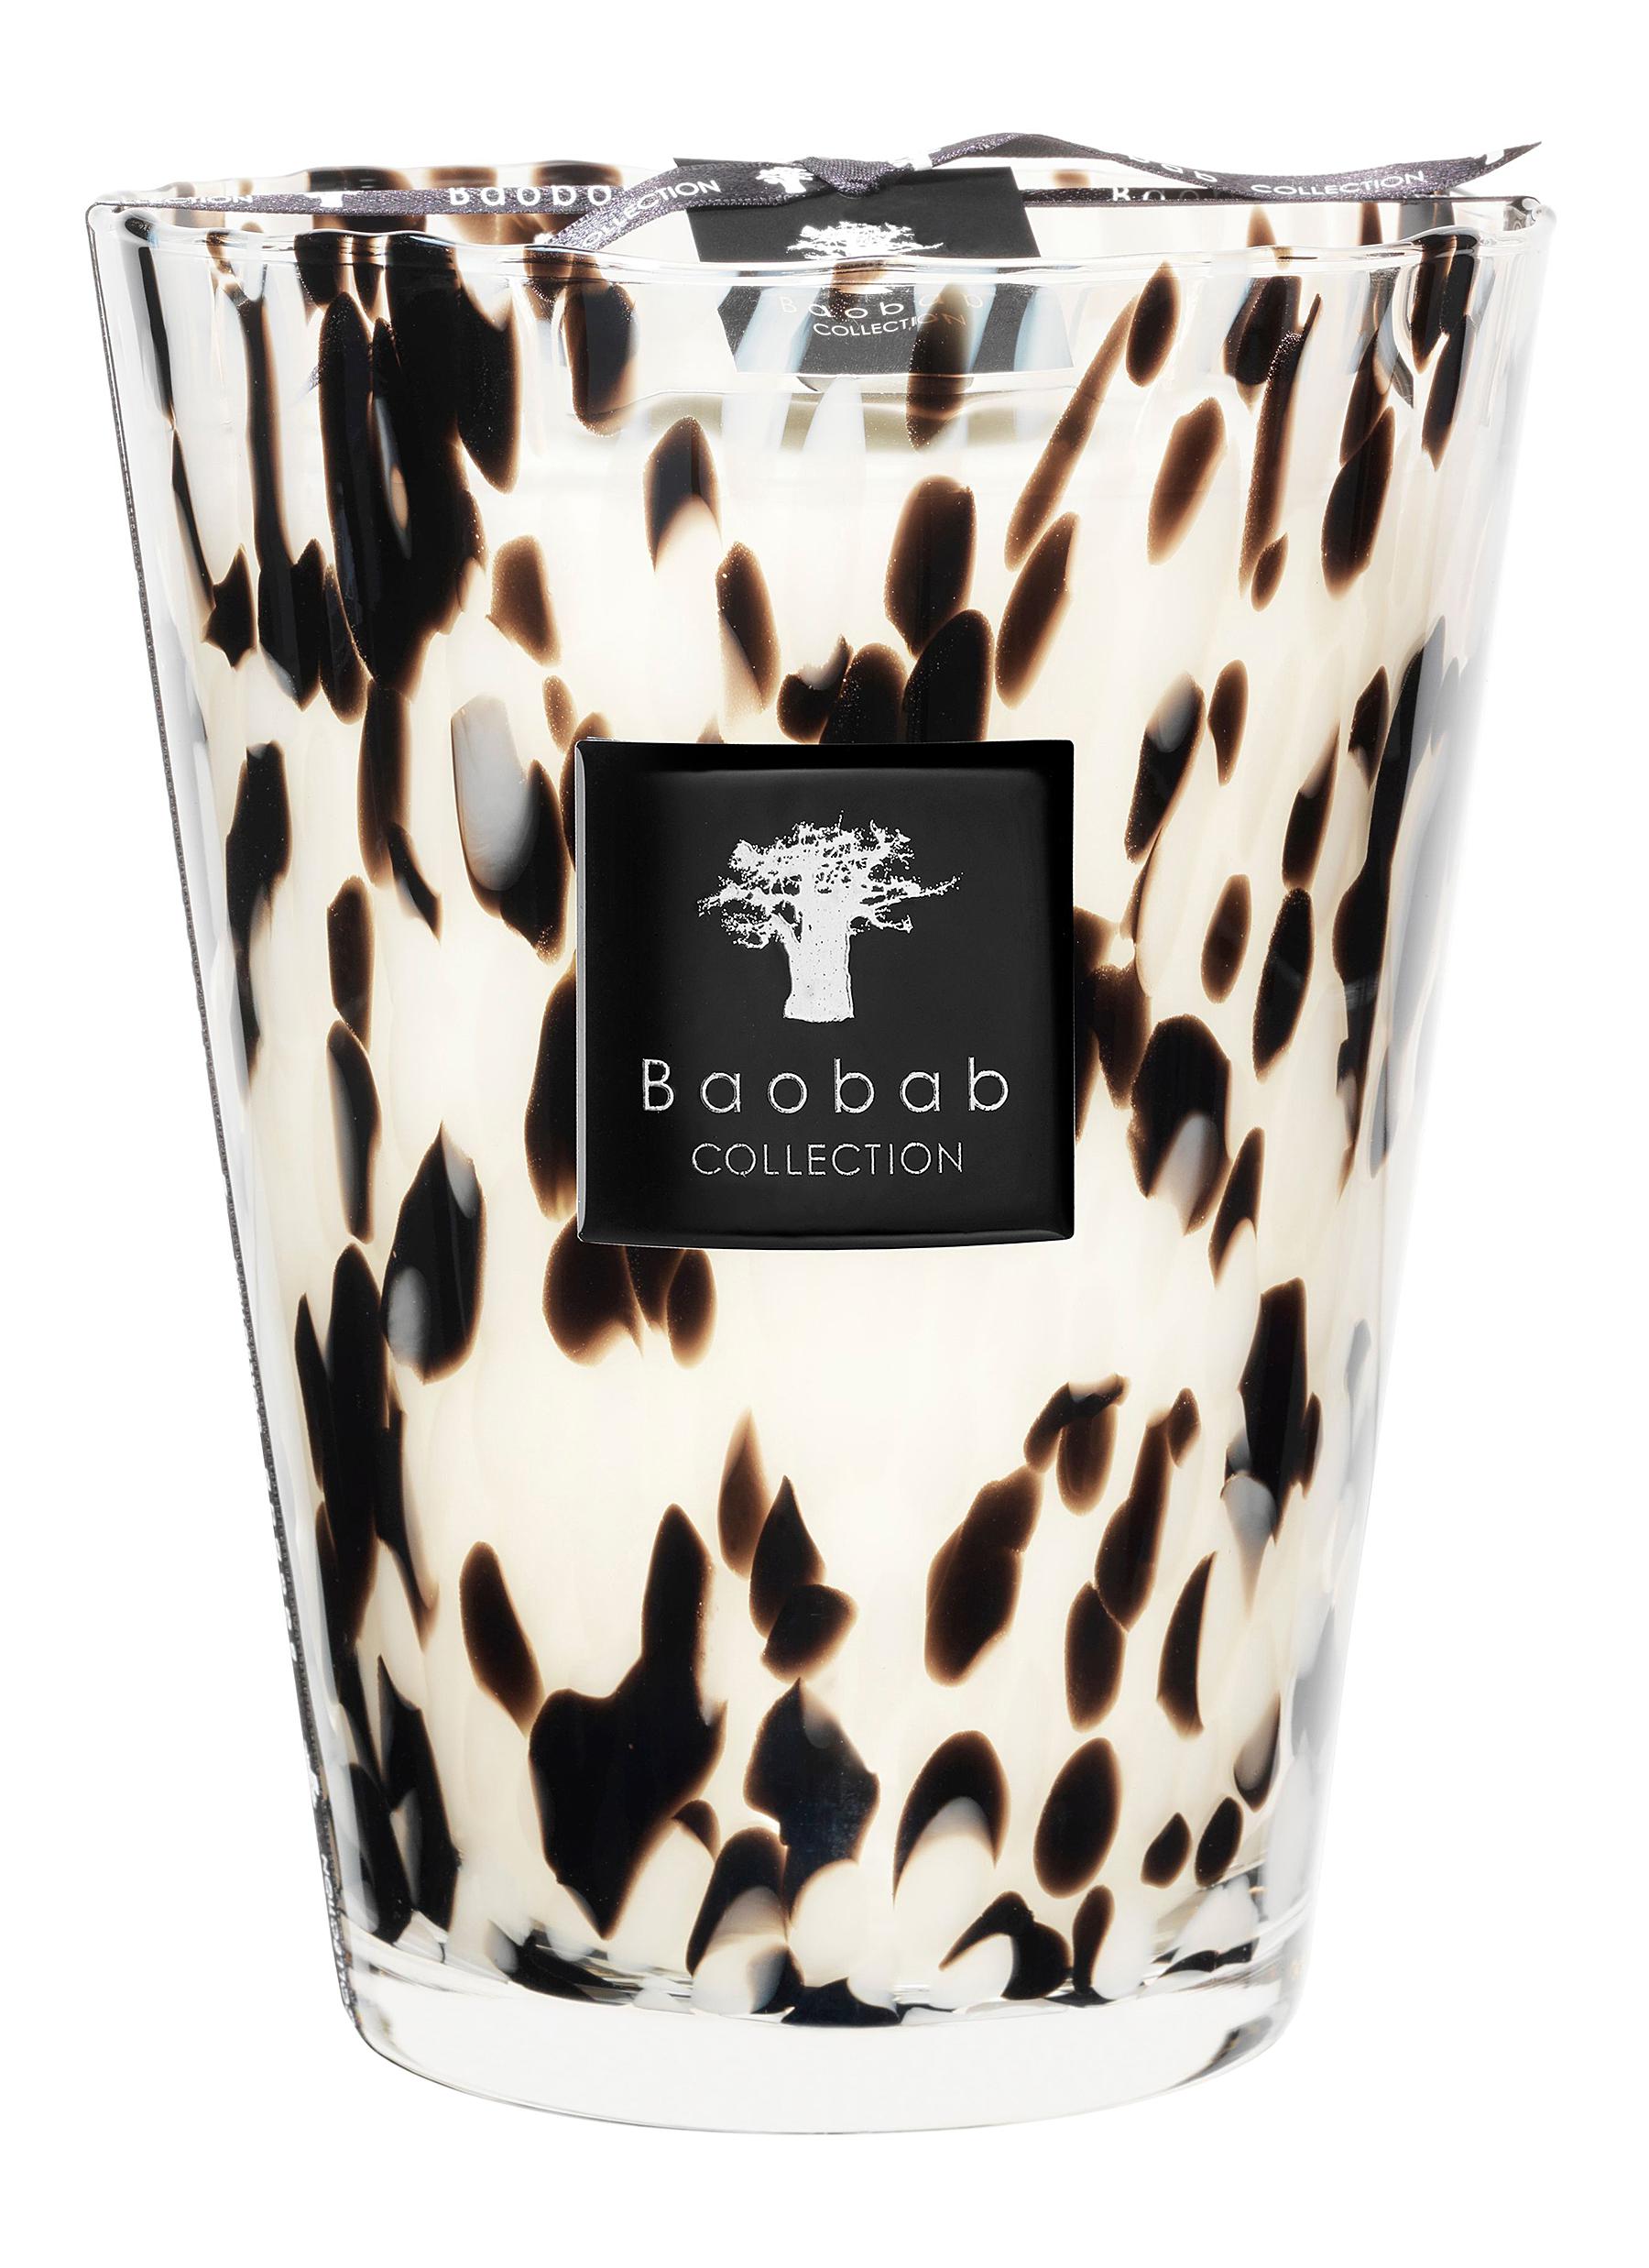 BAOBAB COLLECTION, Pearls Black MAX24 Scented Candle 3kg